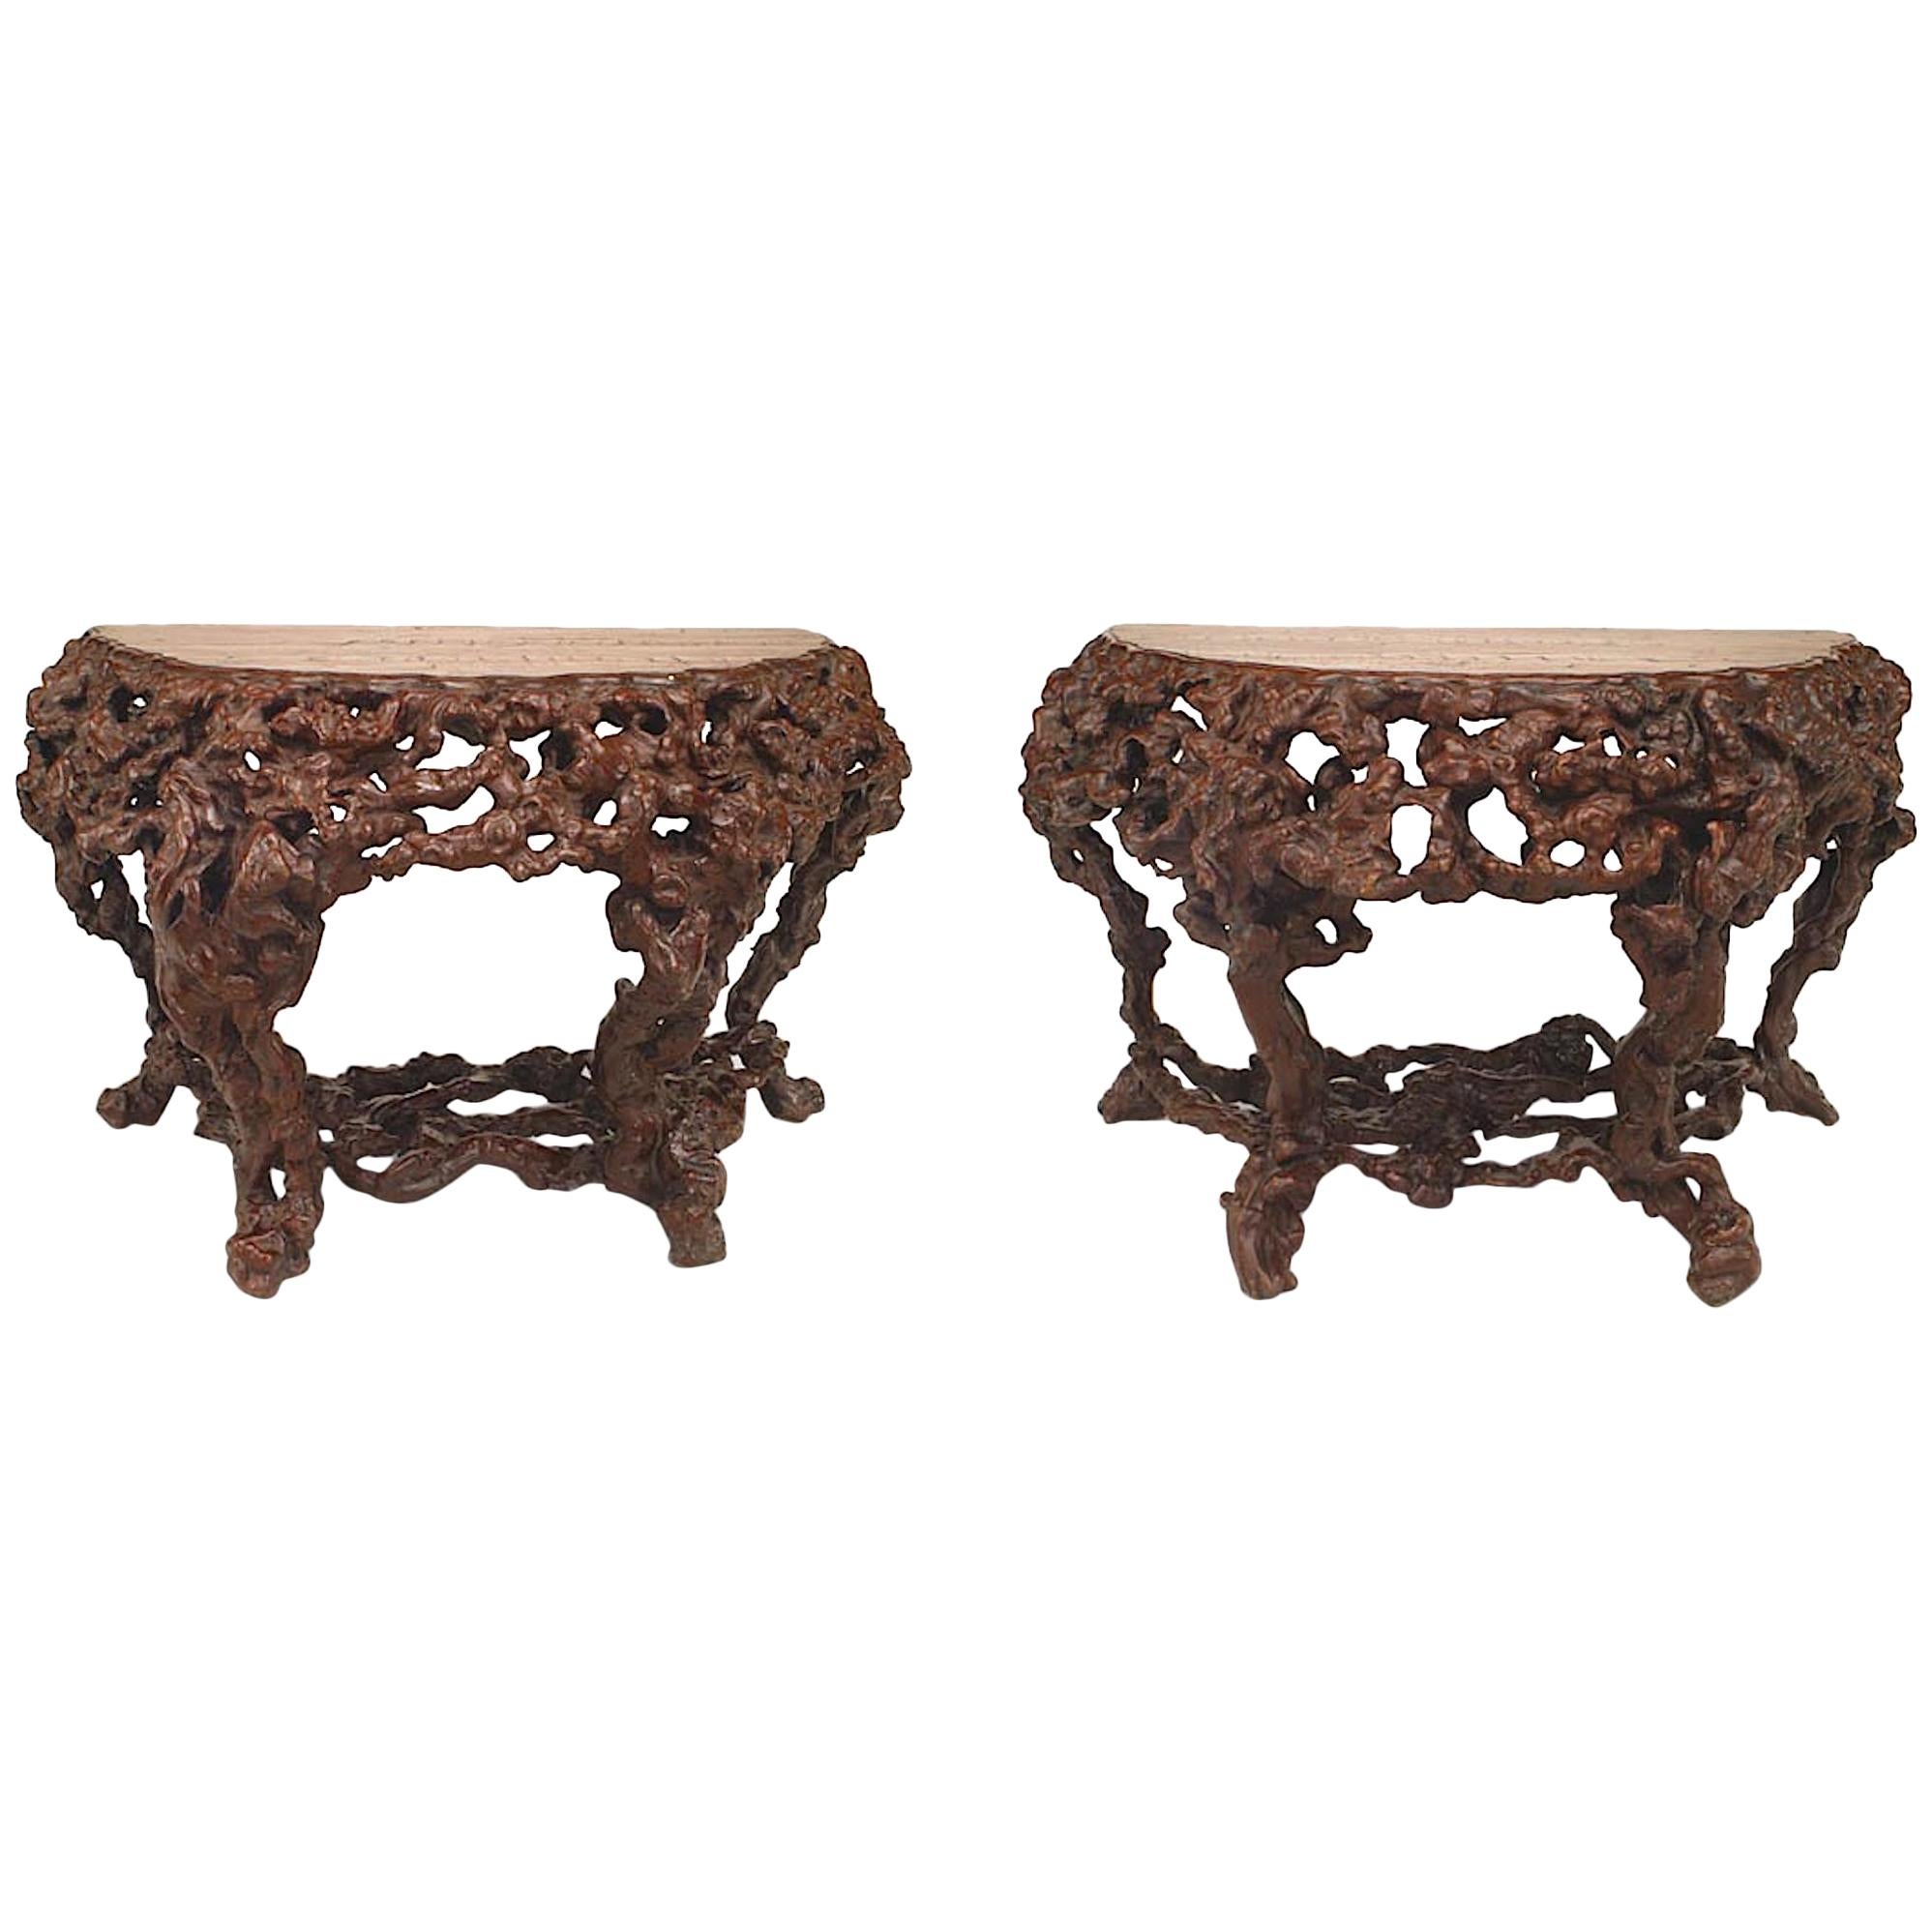 Pair of Chinese Rustic Root Console Tables